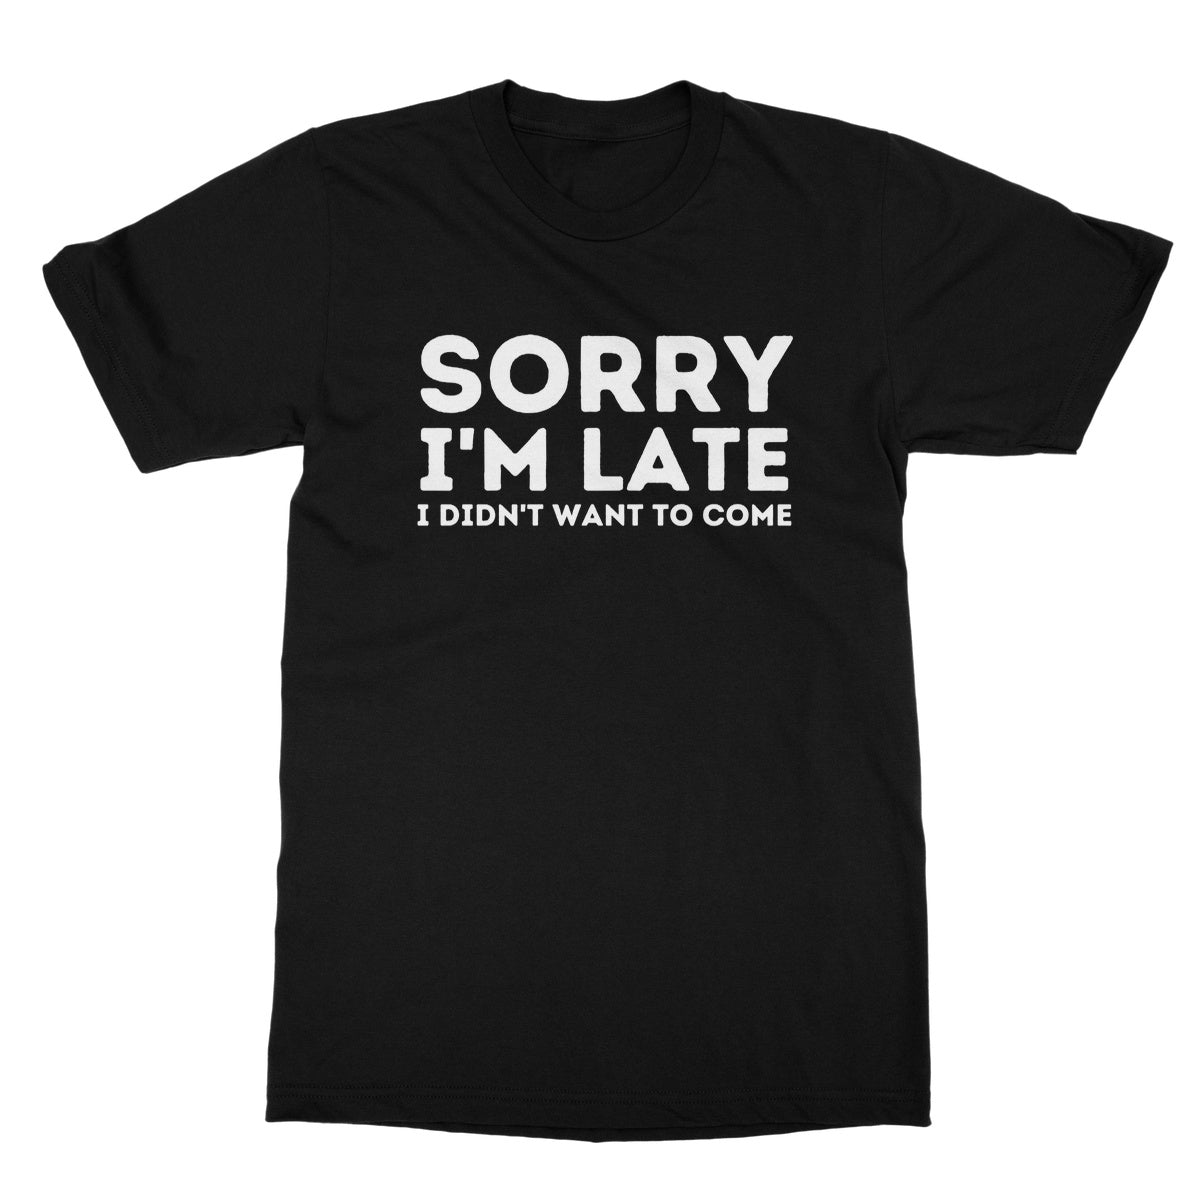 sorry I'm late I didn't want to come t shirt black